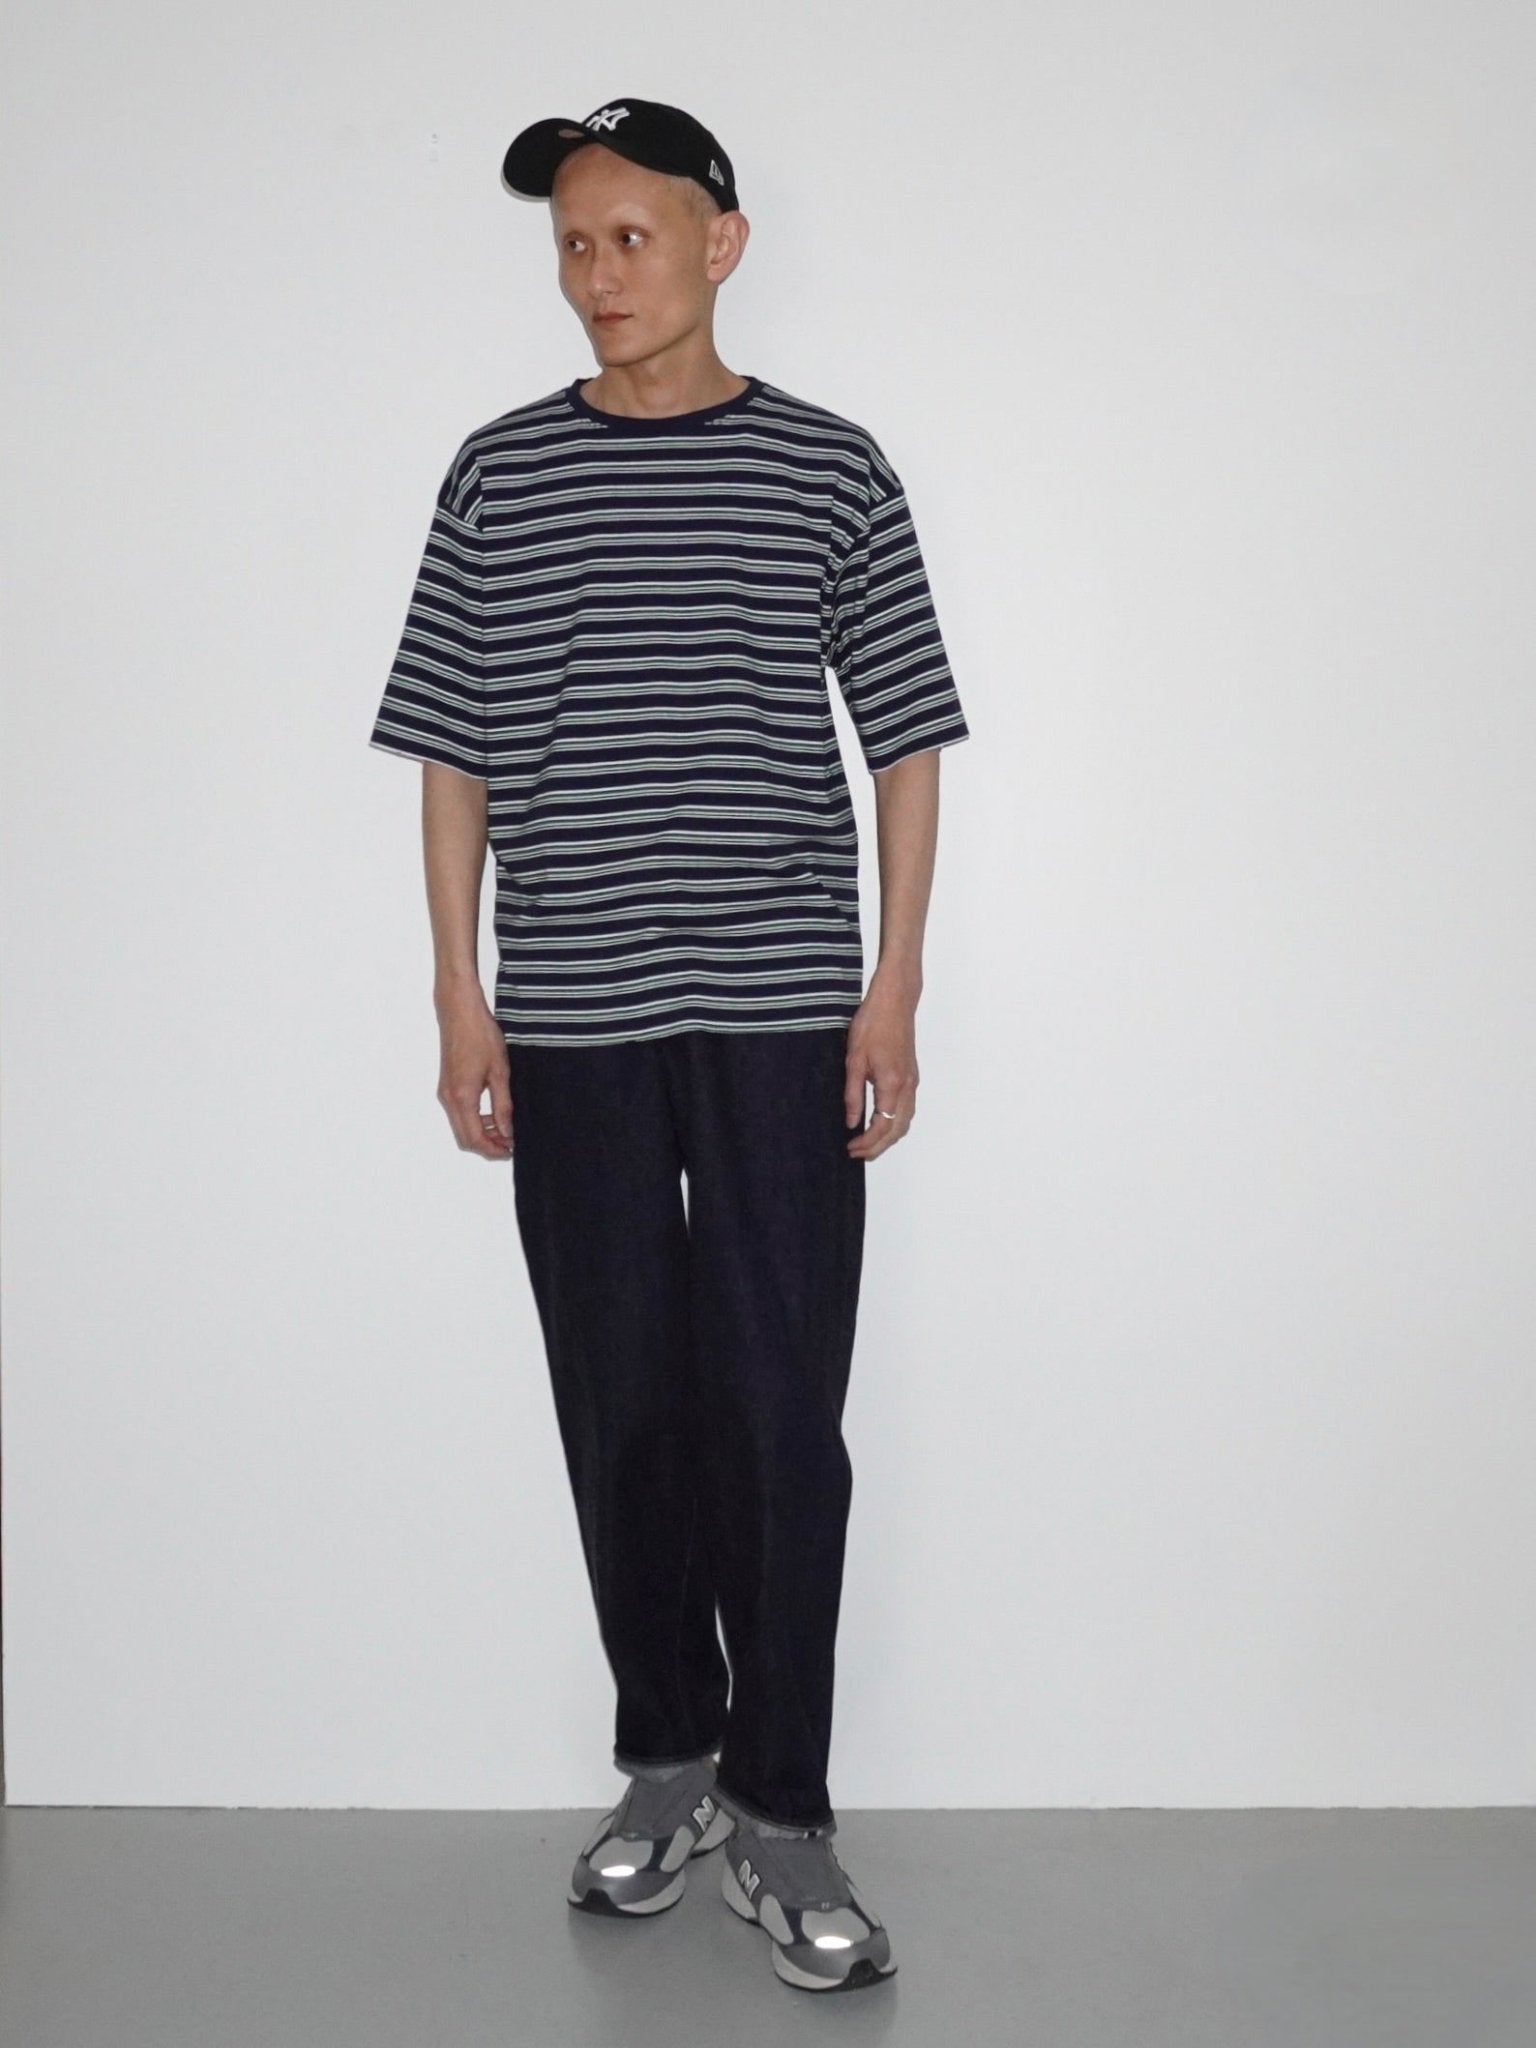 LENO] LOOSE TAPERED JEANS リノ ルーズ テーパード ジーンズ 